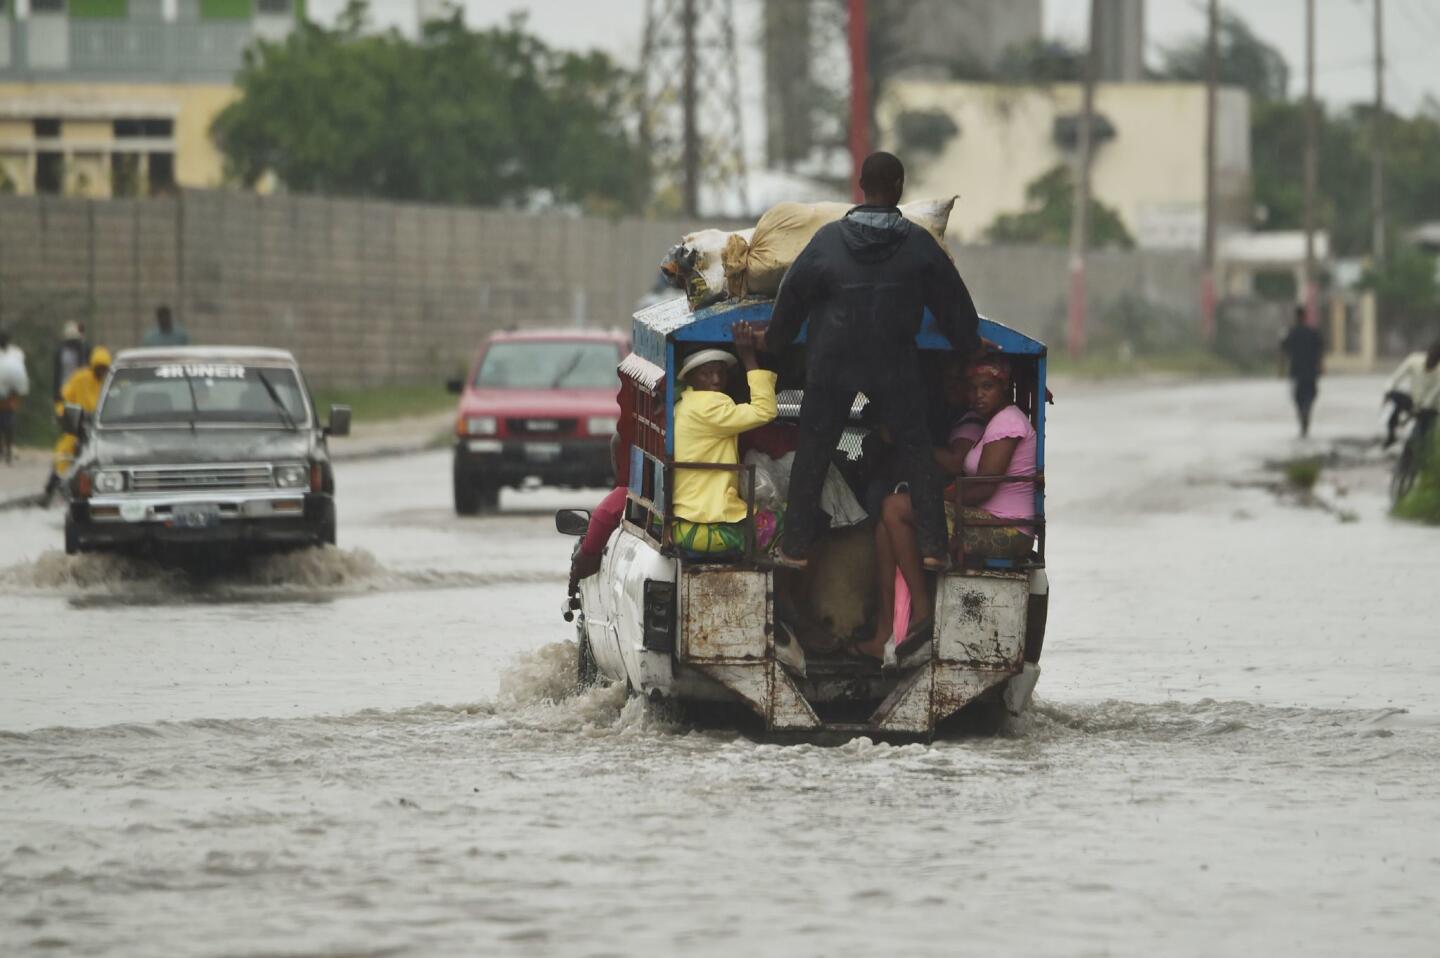 A "tap tap" truck crosses the water left by the rain after hurricane Matthew in Port-au-Prince, Haiti, on Oct. 4, 2016.